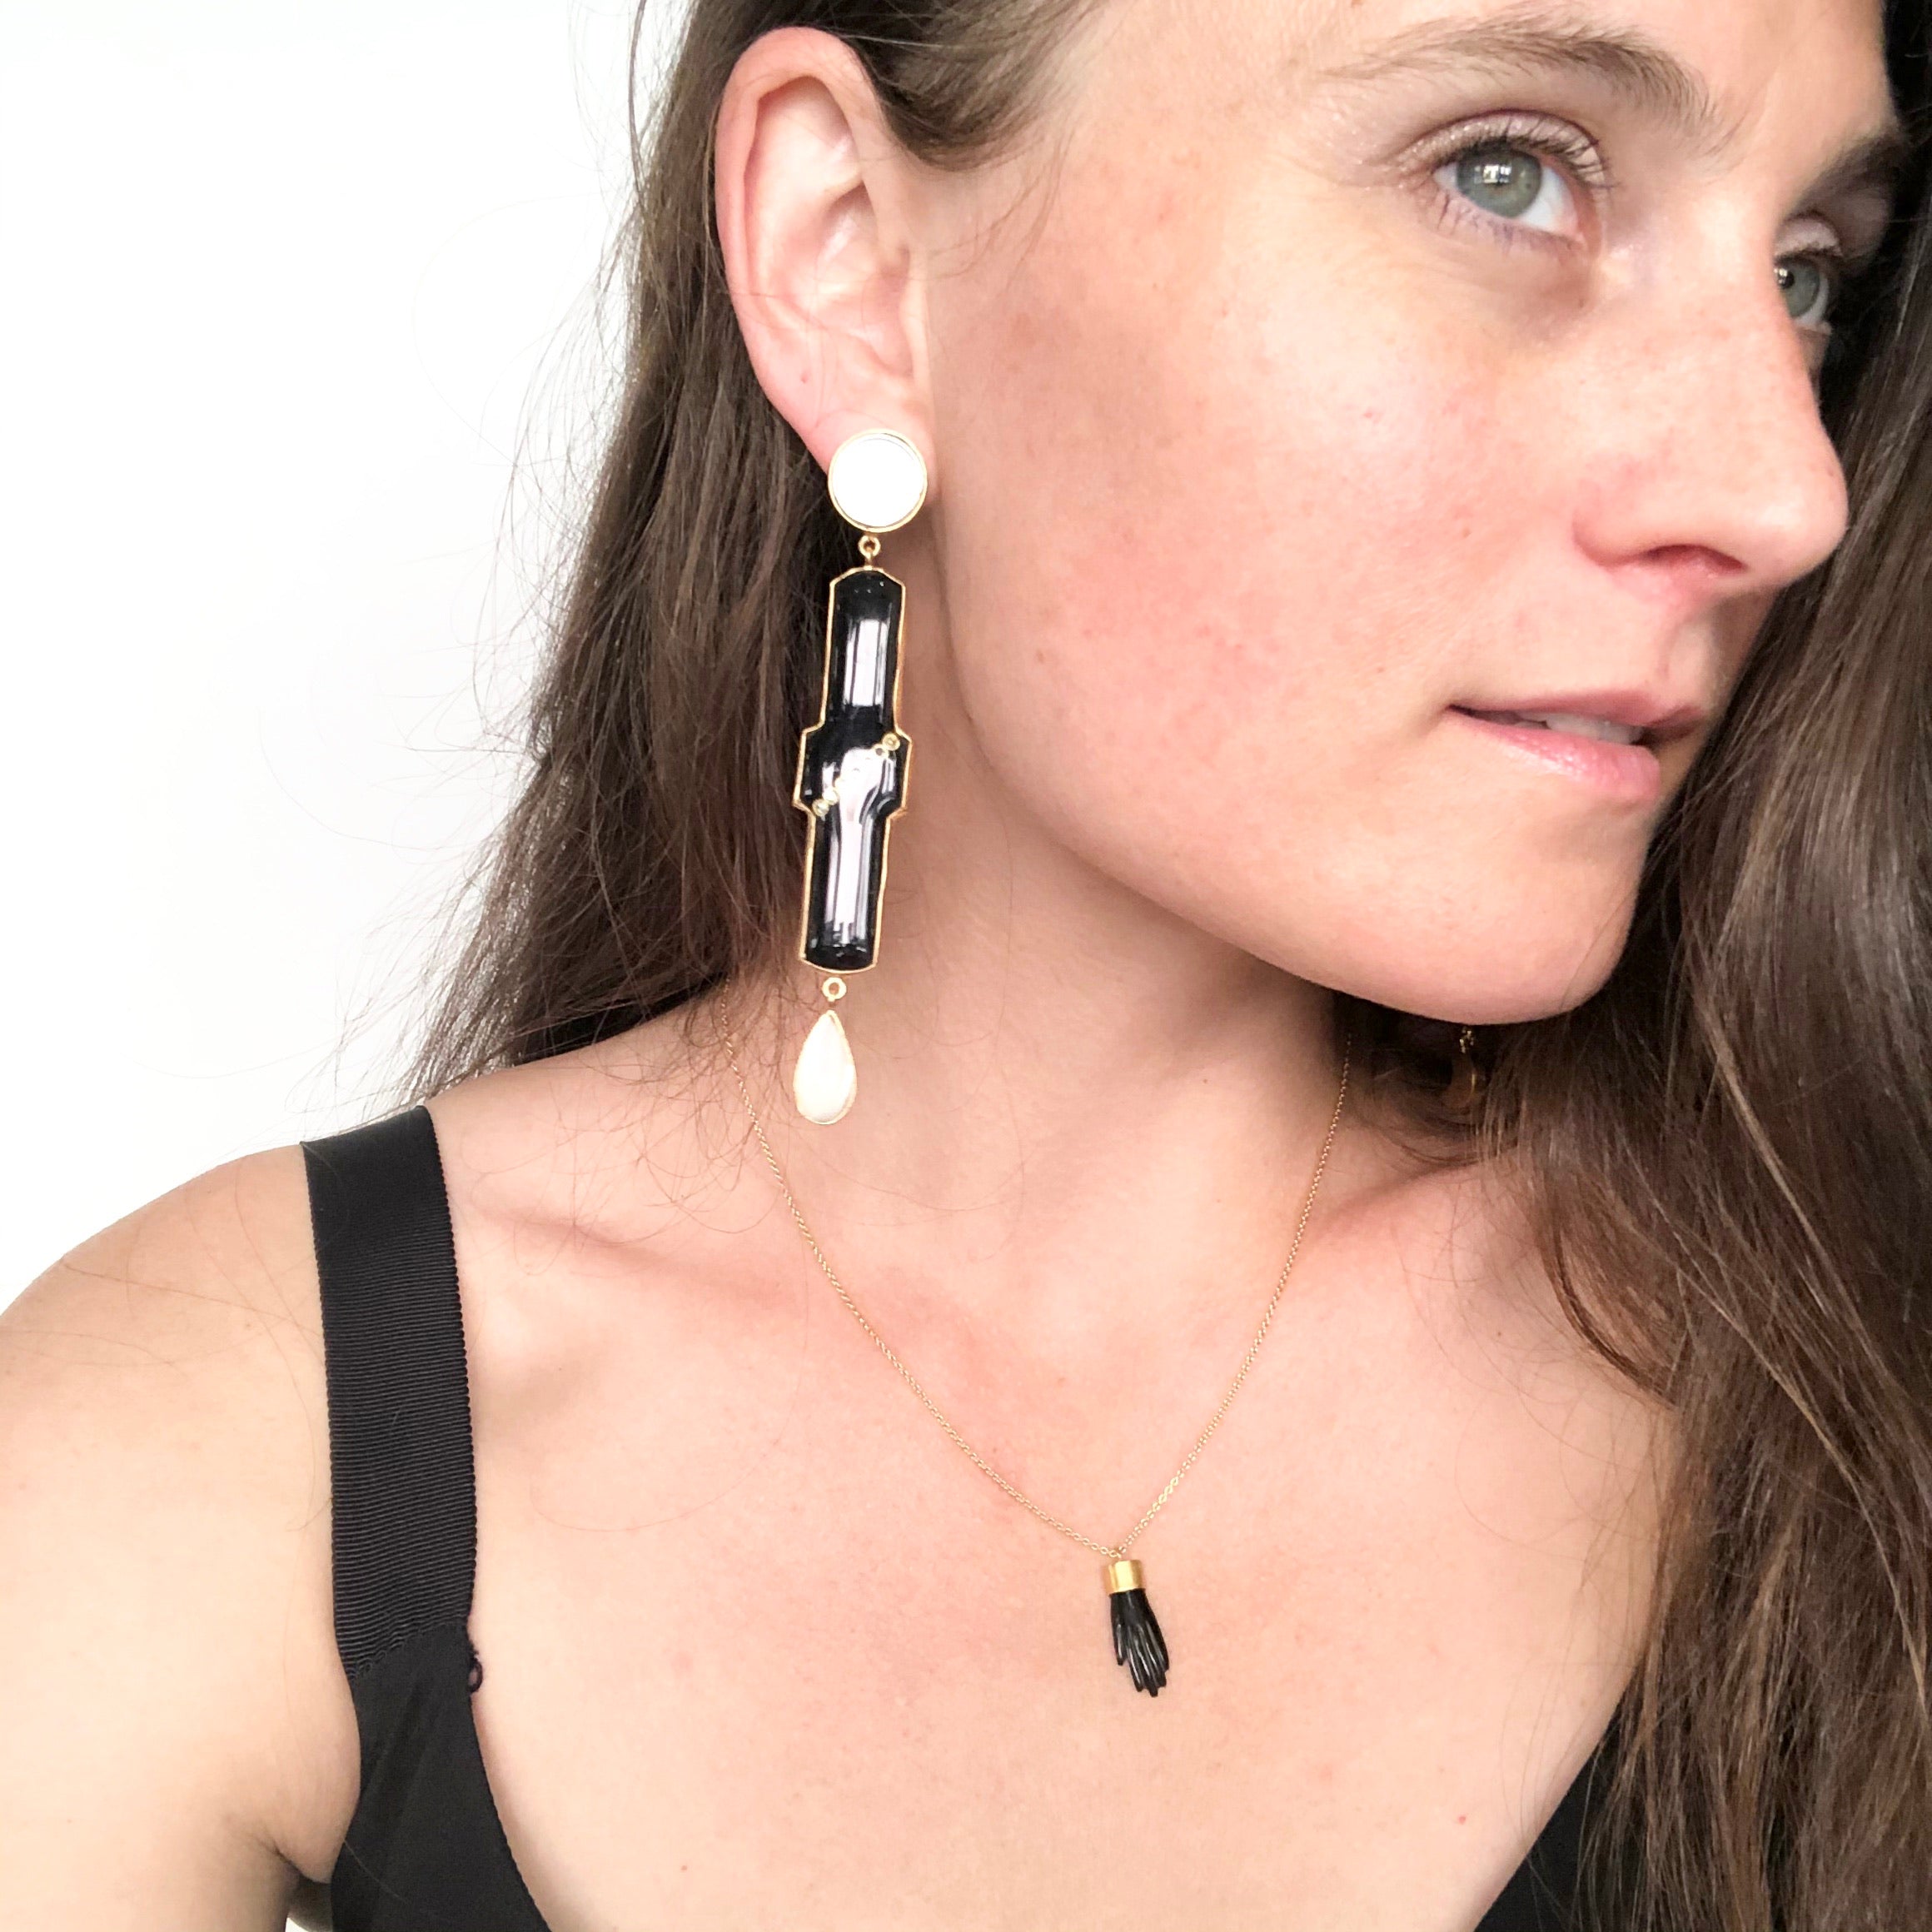 Example of black matching set of earrings for size reference